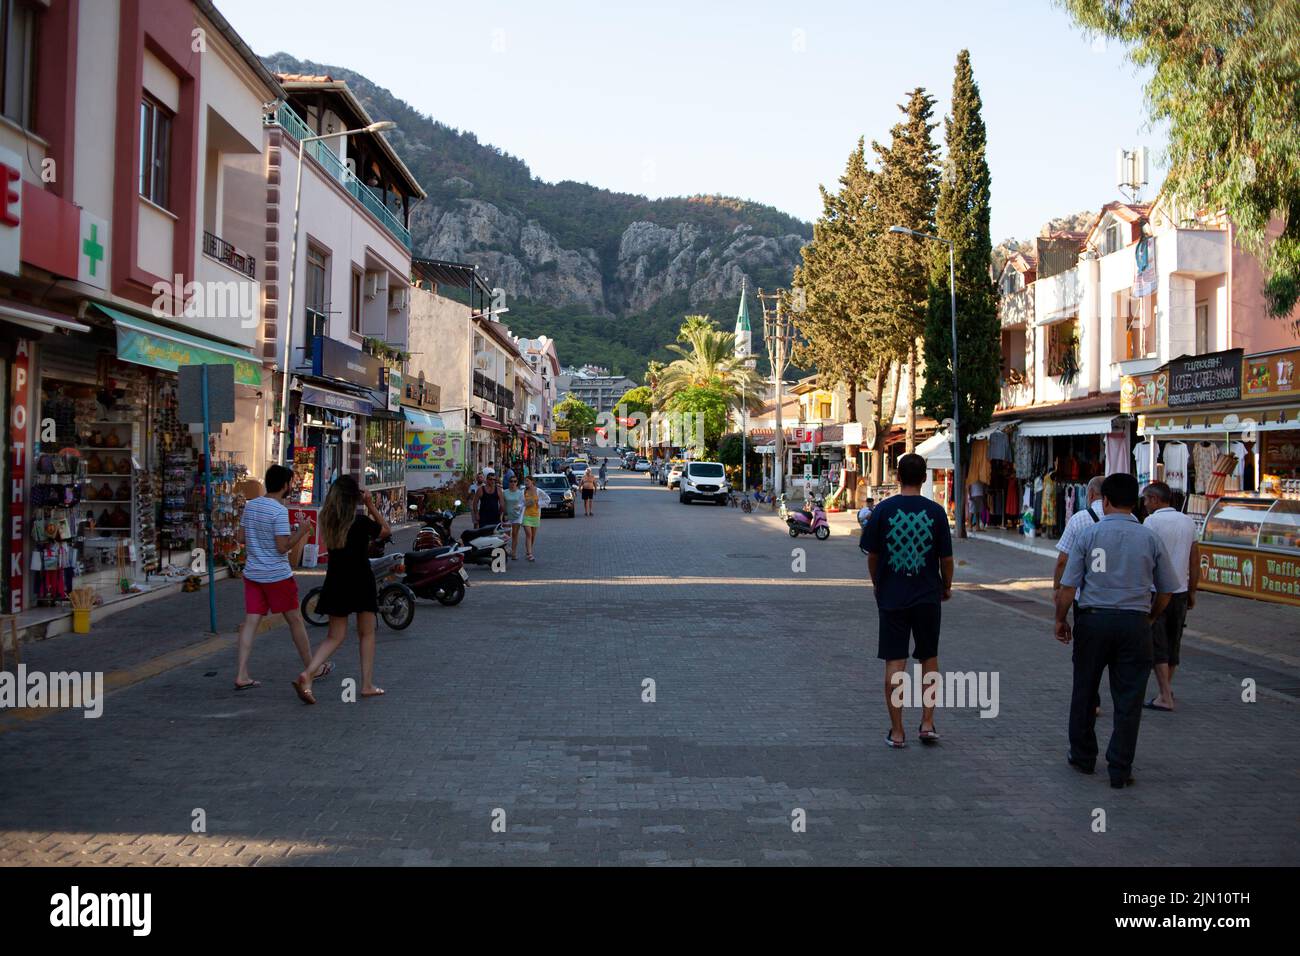 Tourists walk past a cafeteria and souvenir store in small resort town. Street food and souvenir shops on main street. Turunc, Turkey - September 7, 2 Stock Photo